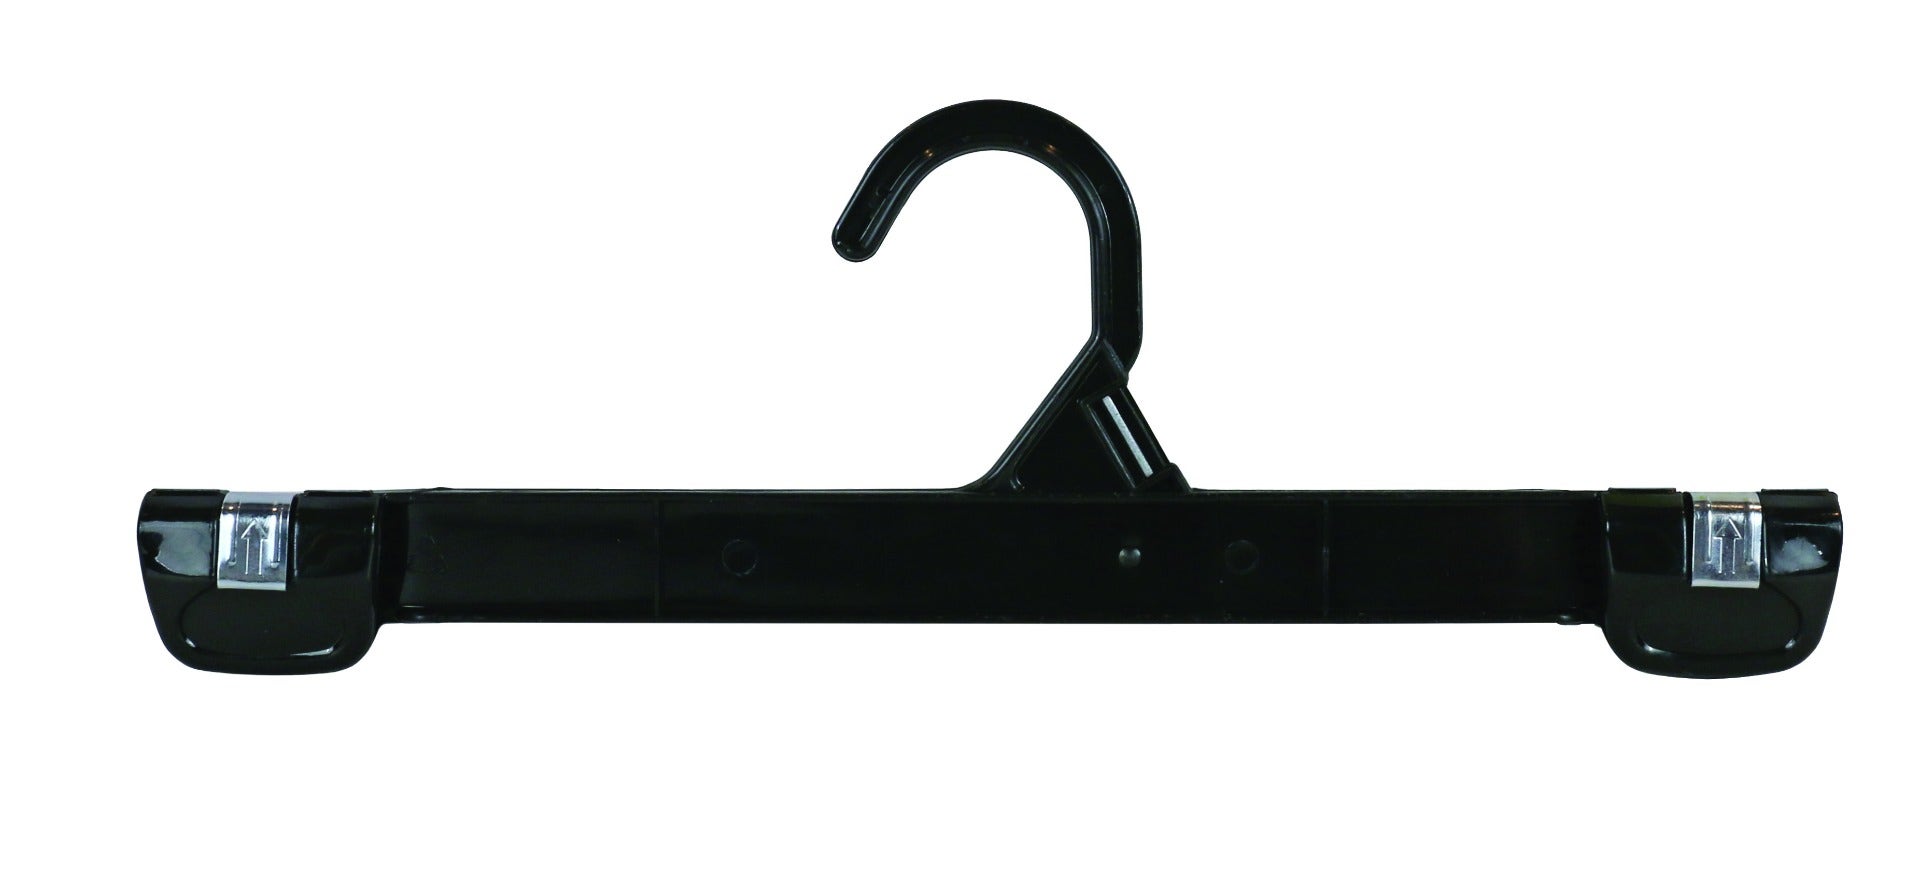 Pant Hanger With Push Clips and Plastic Hooks | 100 Pk - Eddie's Hang-Up Display Ltd.